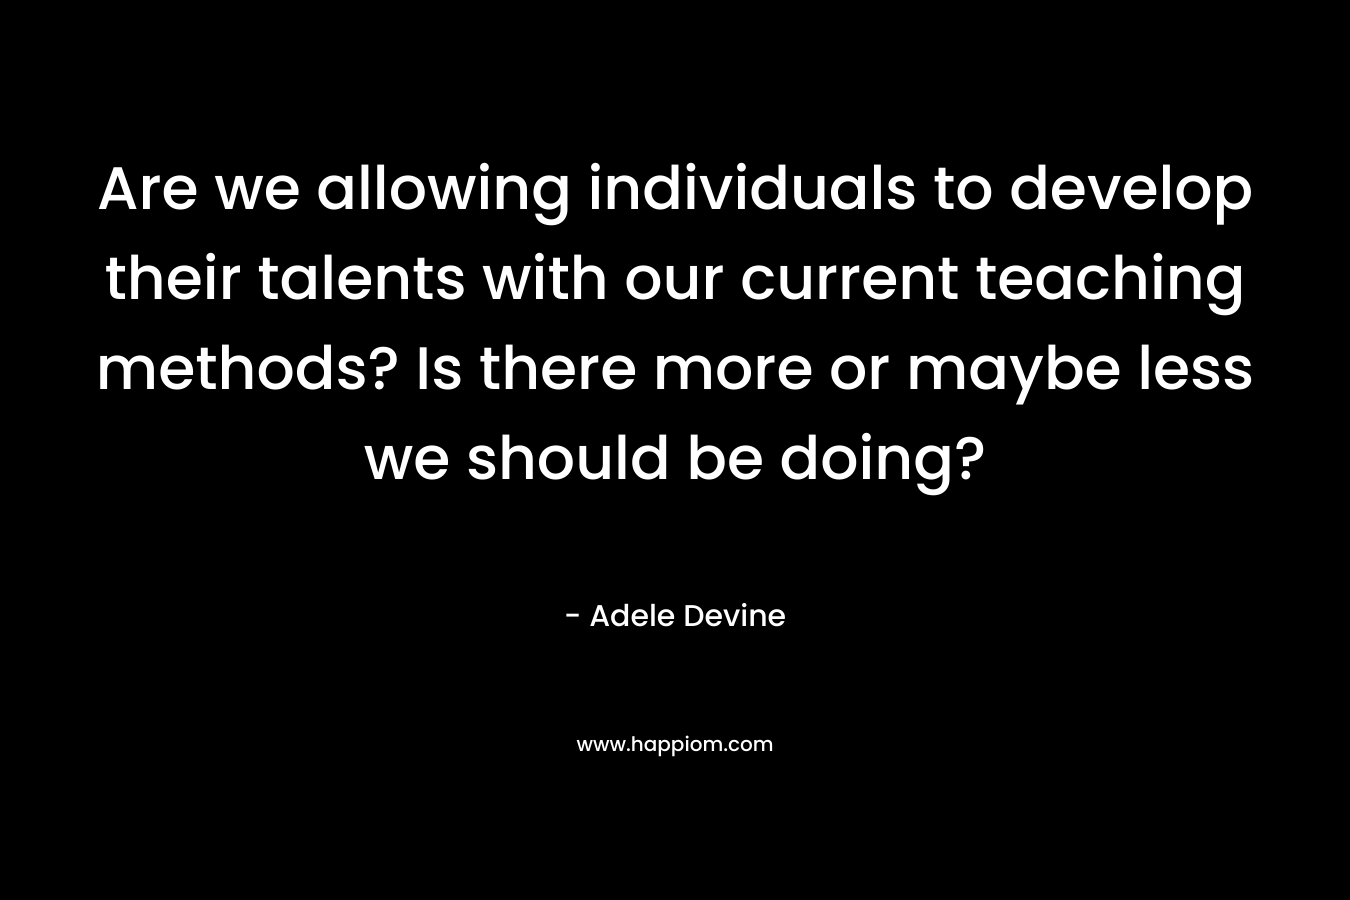 Are we allowing individuals to develop their talents with our current teaching methods? Is there more or maybe less we should be doing? – Adele Devine